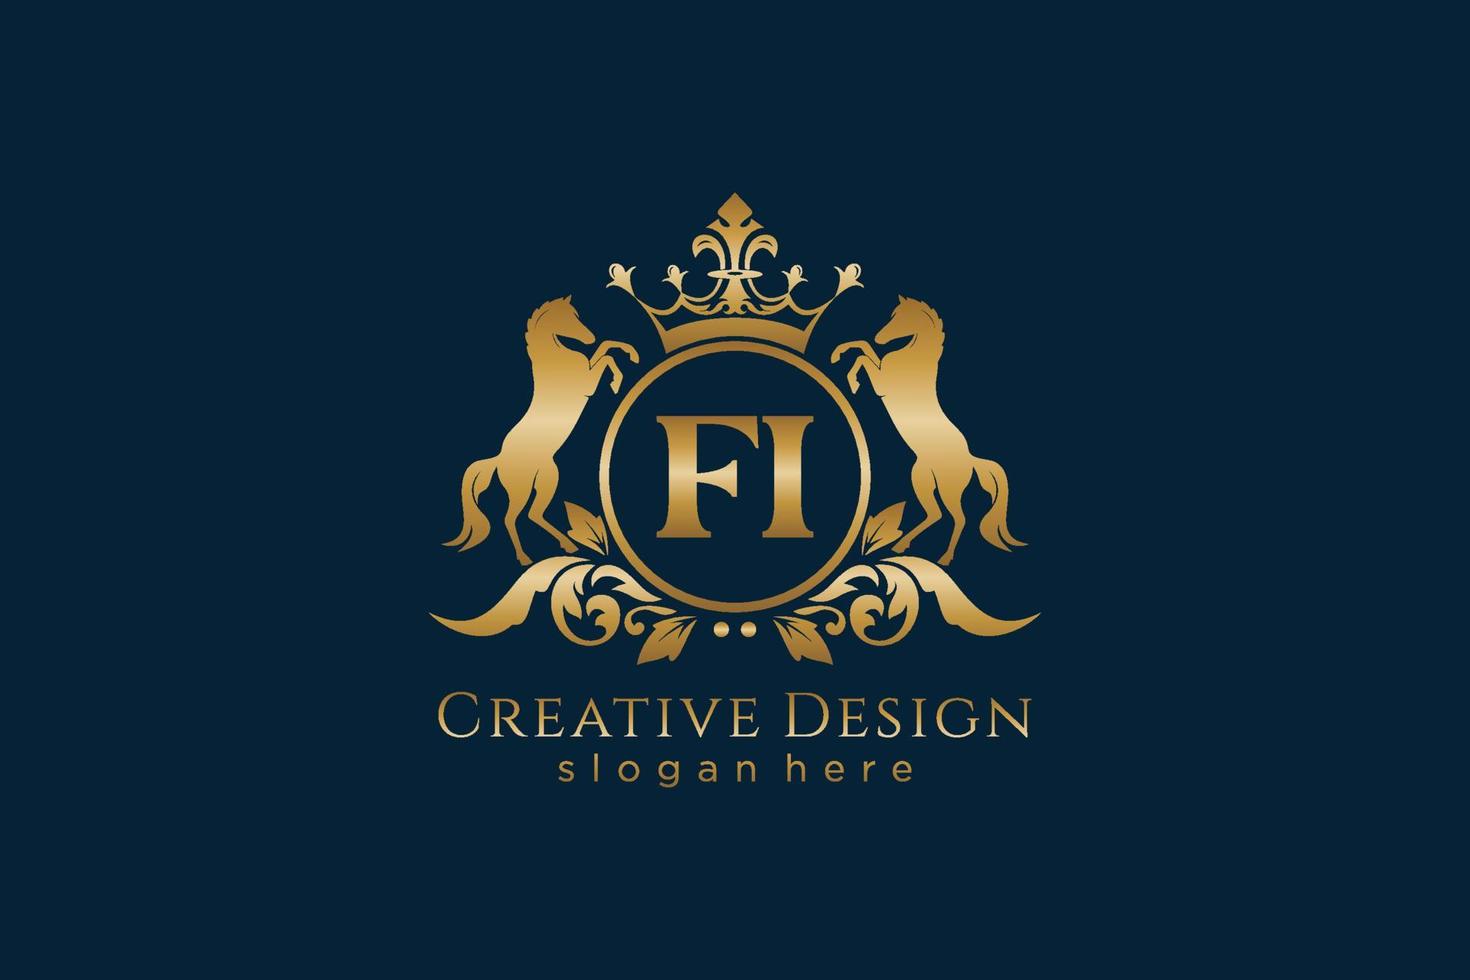 initial FI Retro golden crest with circle and two horses, badge template with scrolls and royal crown - perfect for luxurious branding projects vector